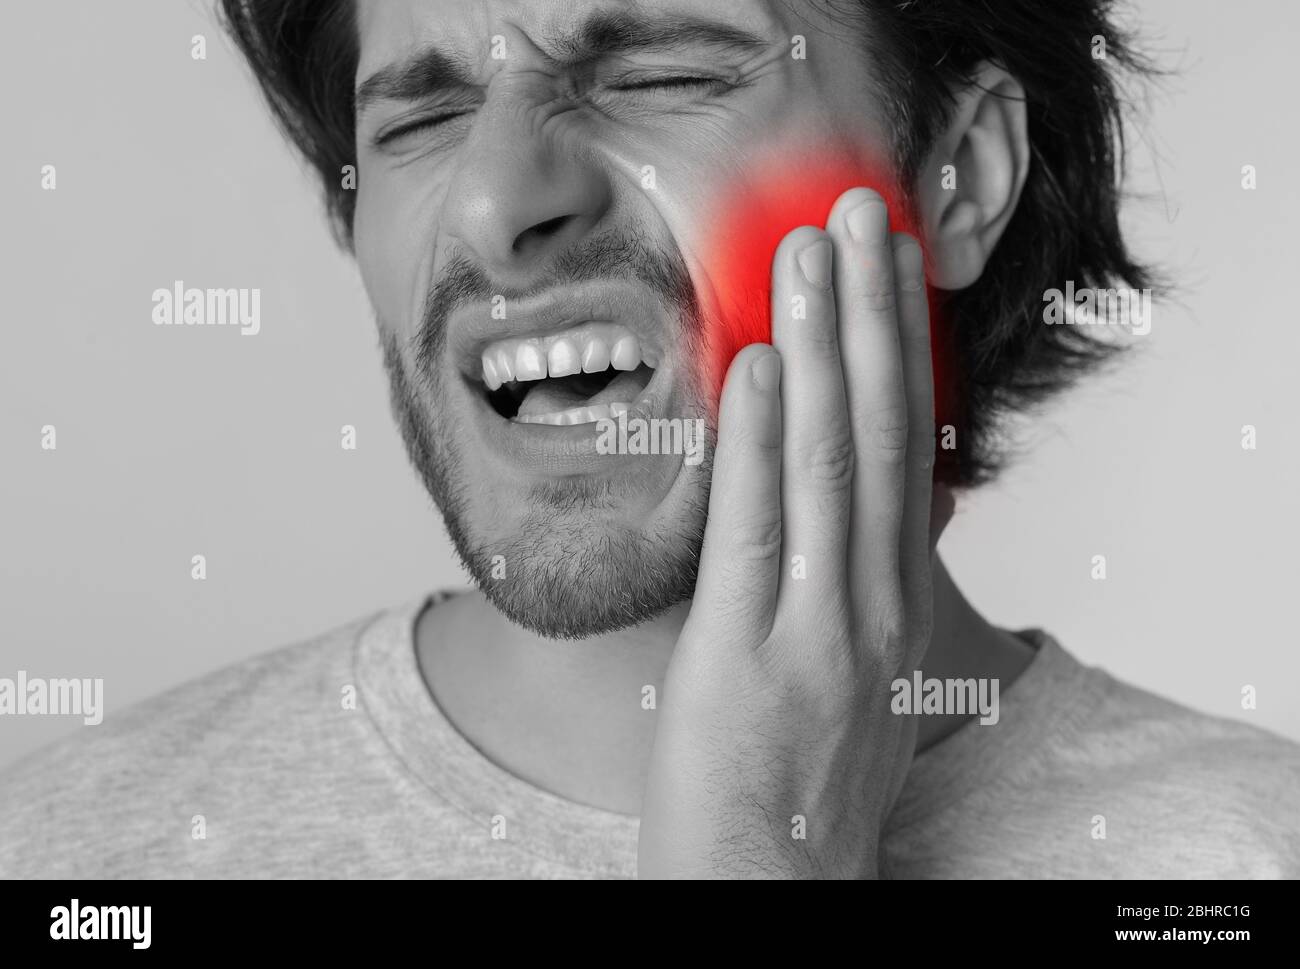 Tooth pain and dentistry concept. Man with painful expression Stock Photo